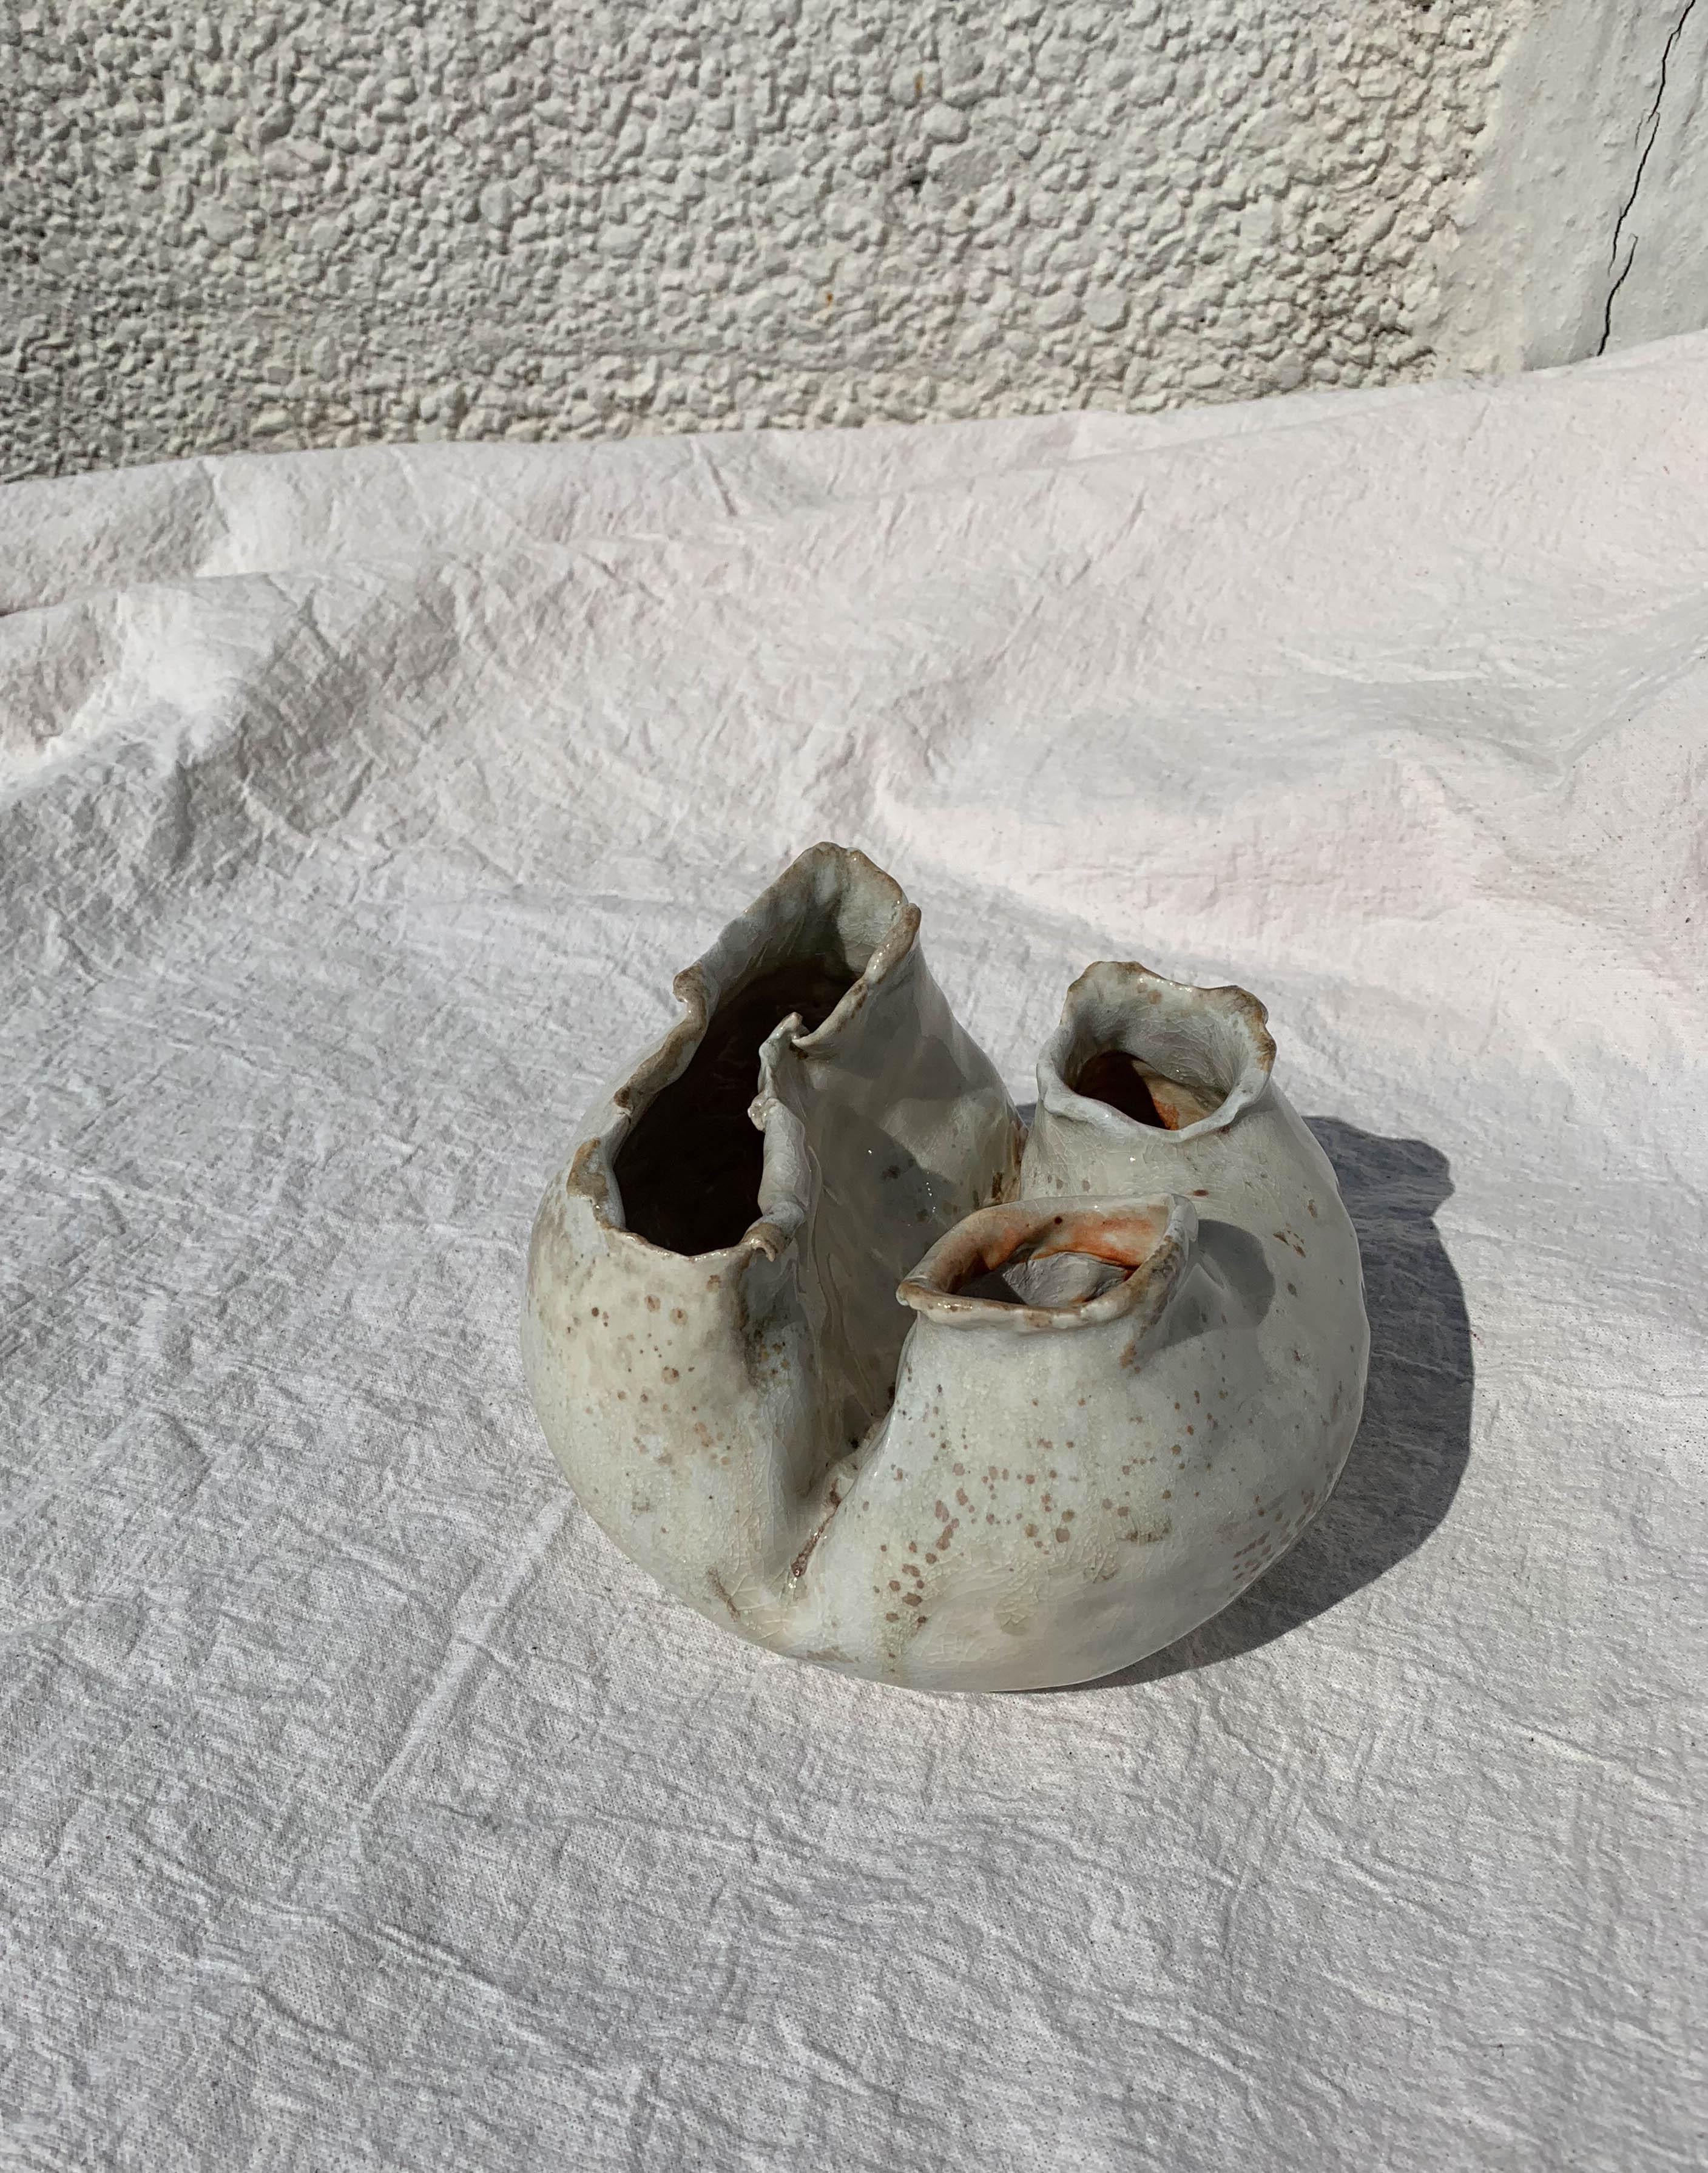 Asymmetric, sculptural vase, coil-built from porcelain clay, then fired in an Anagama/Noborigama kiln in Cold Spring New York.

Diameter approximately 10 inches and 6 inches tall.